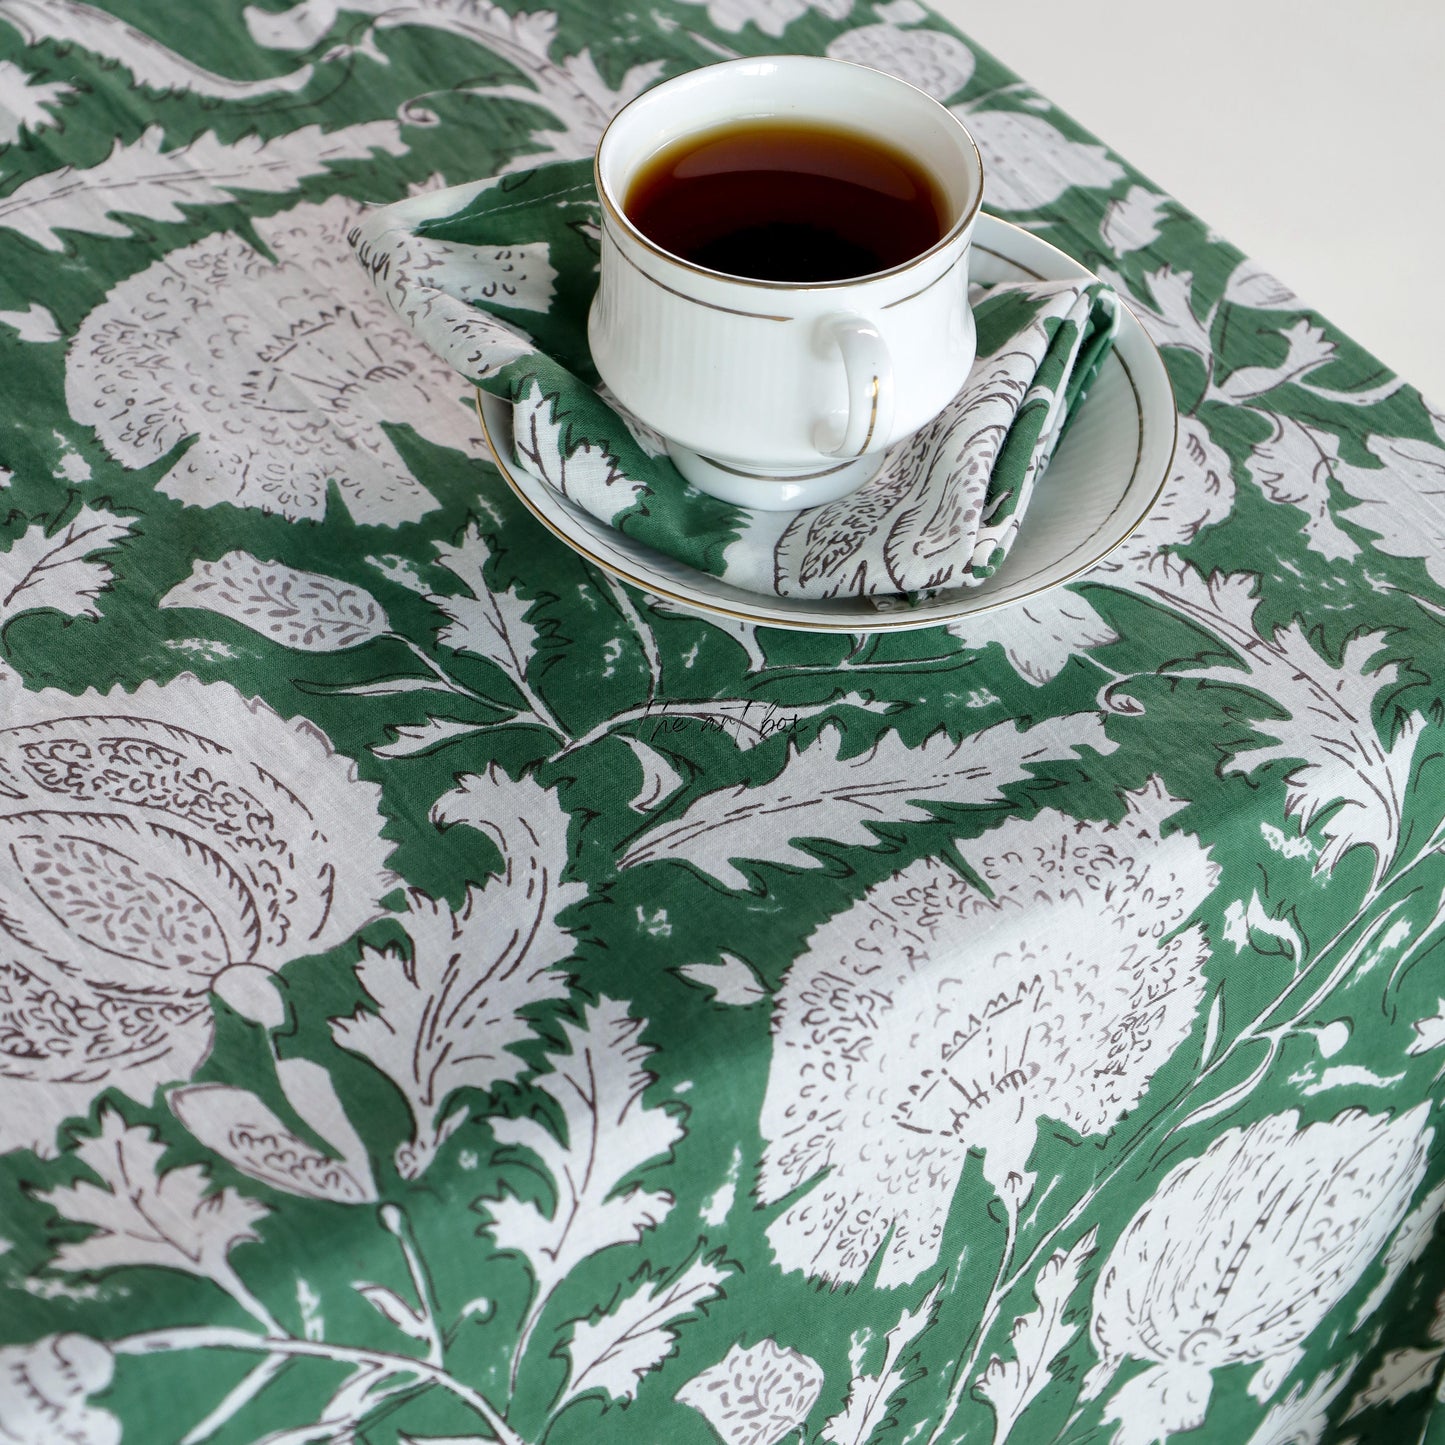 Indian Print Table Cloth, Green Floral Printed Cotton Table Cover